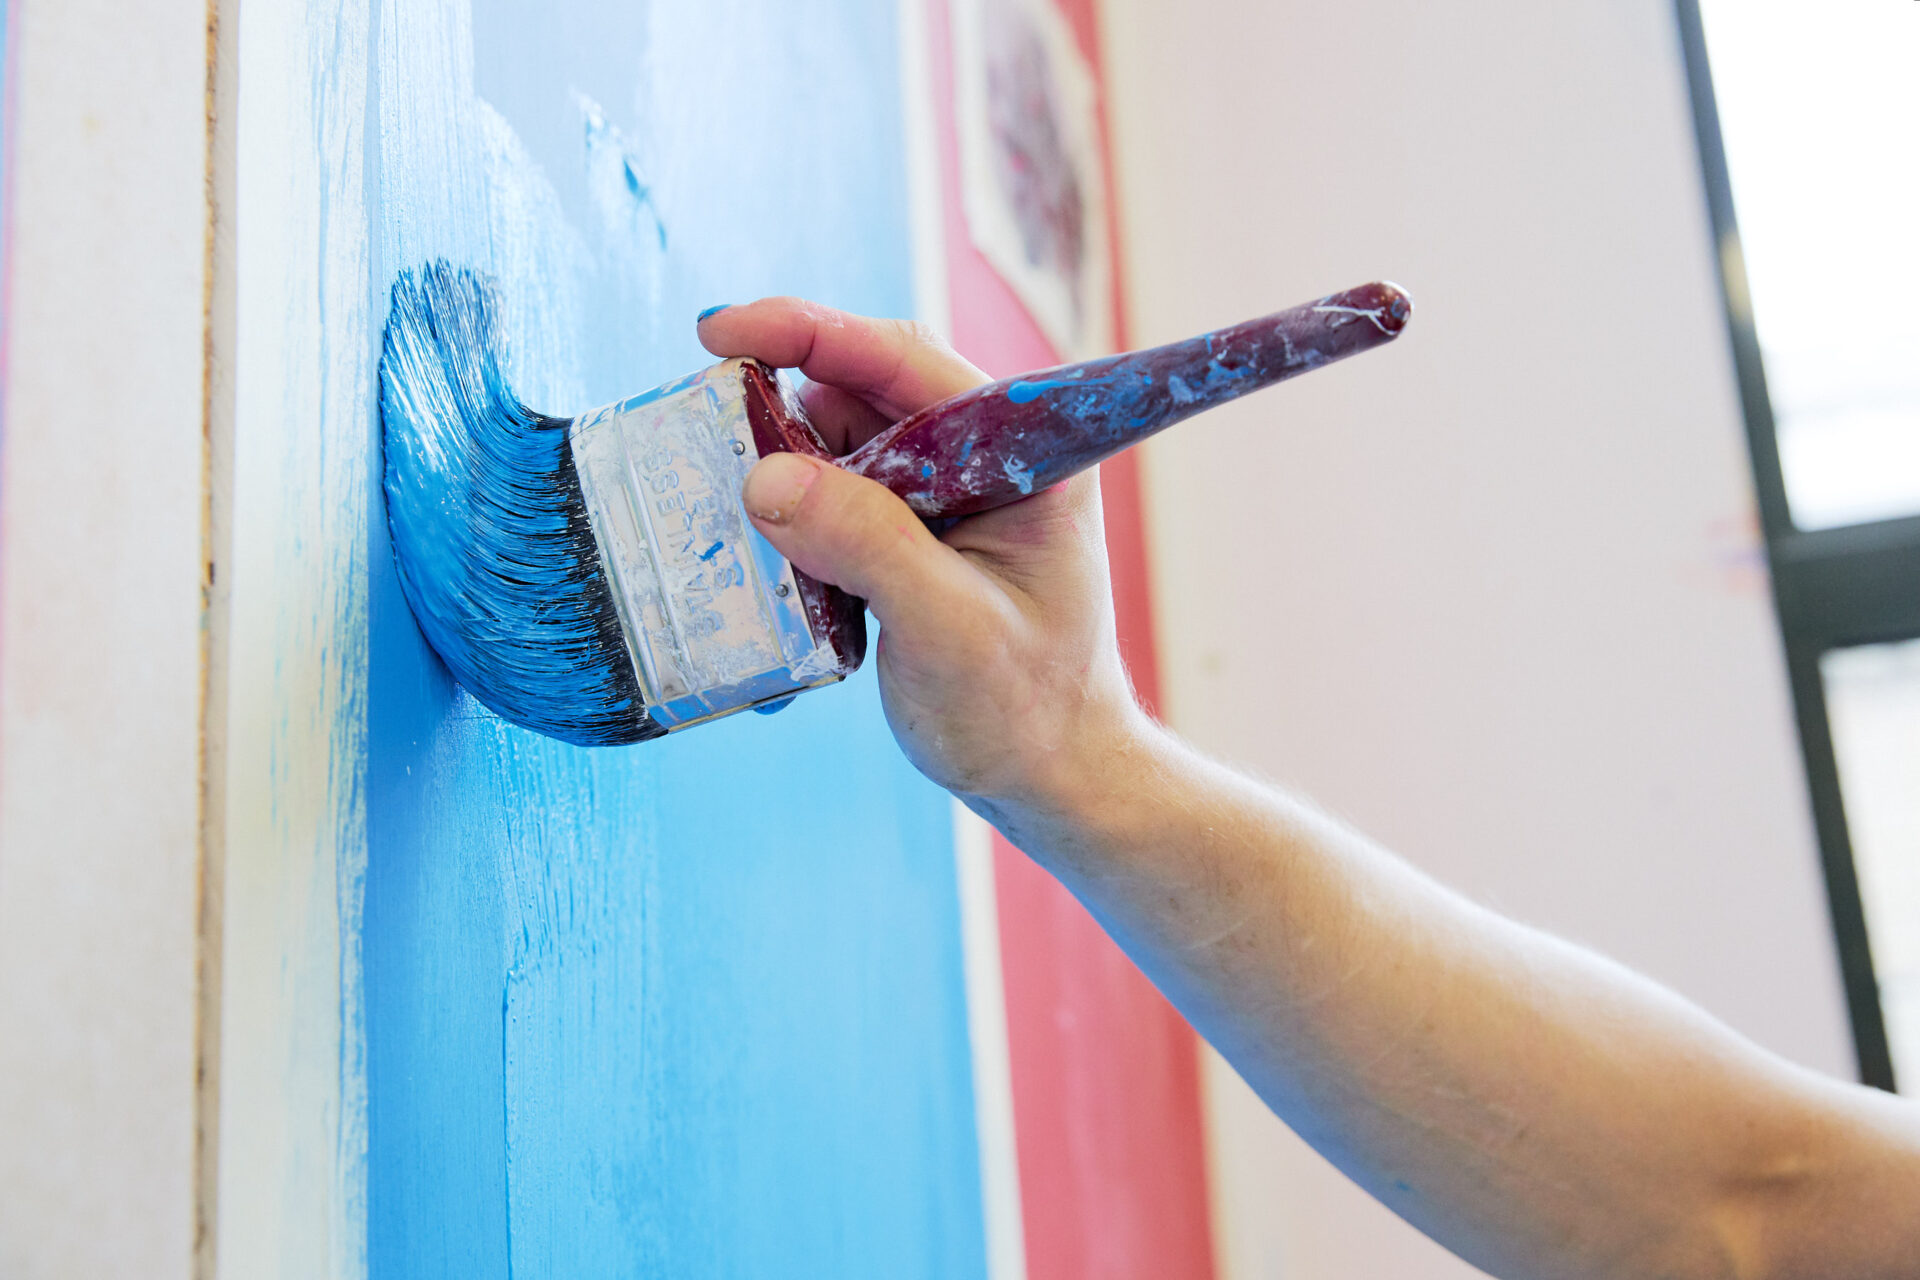 Hand holding a paint brush painting a wall blue